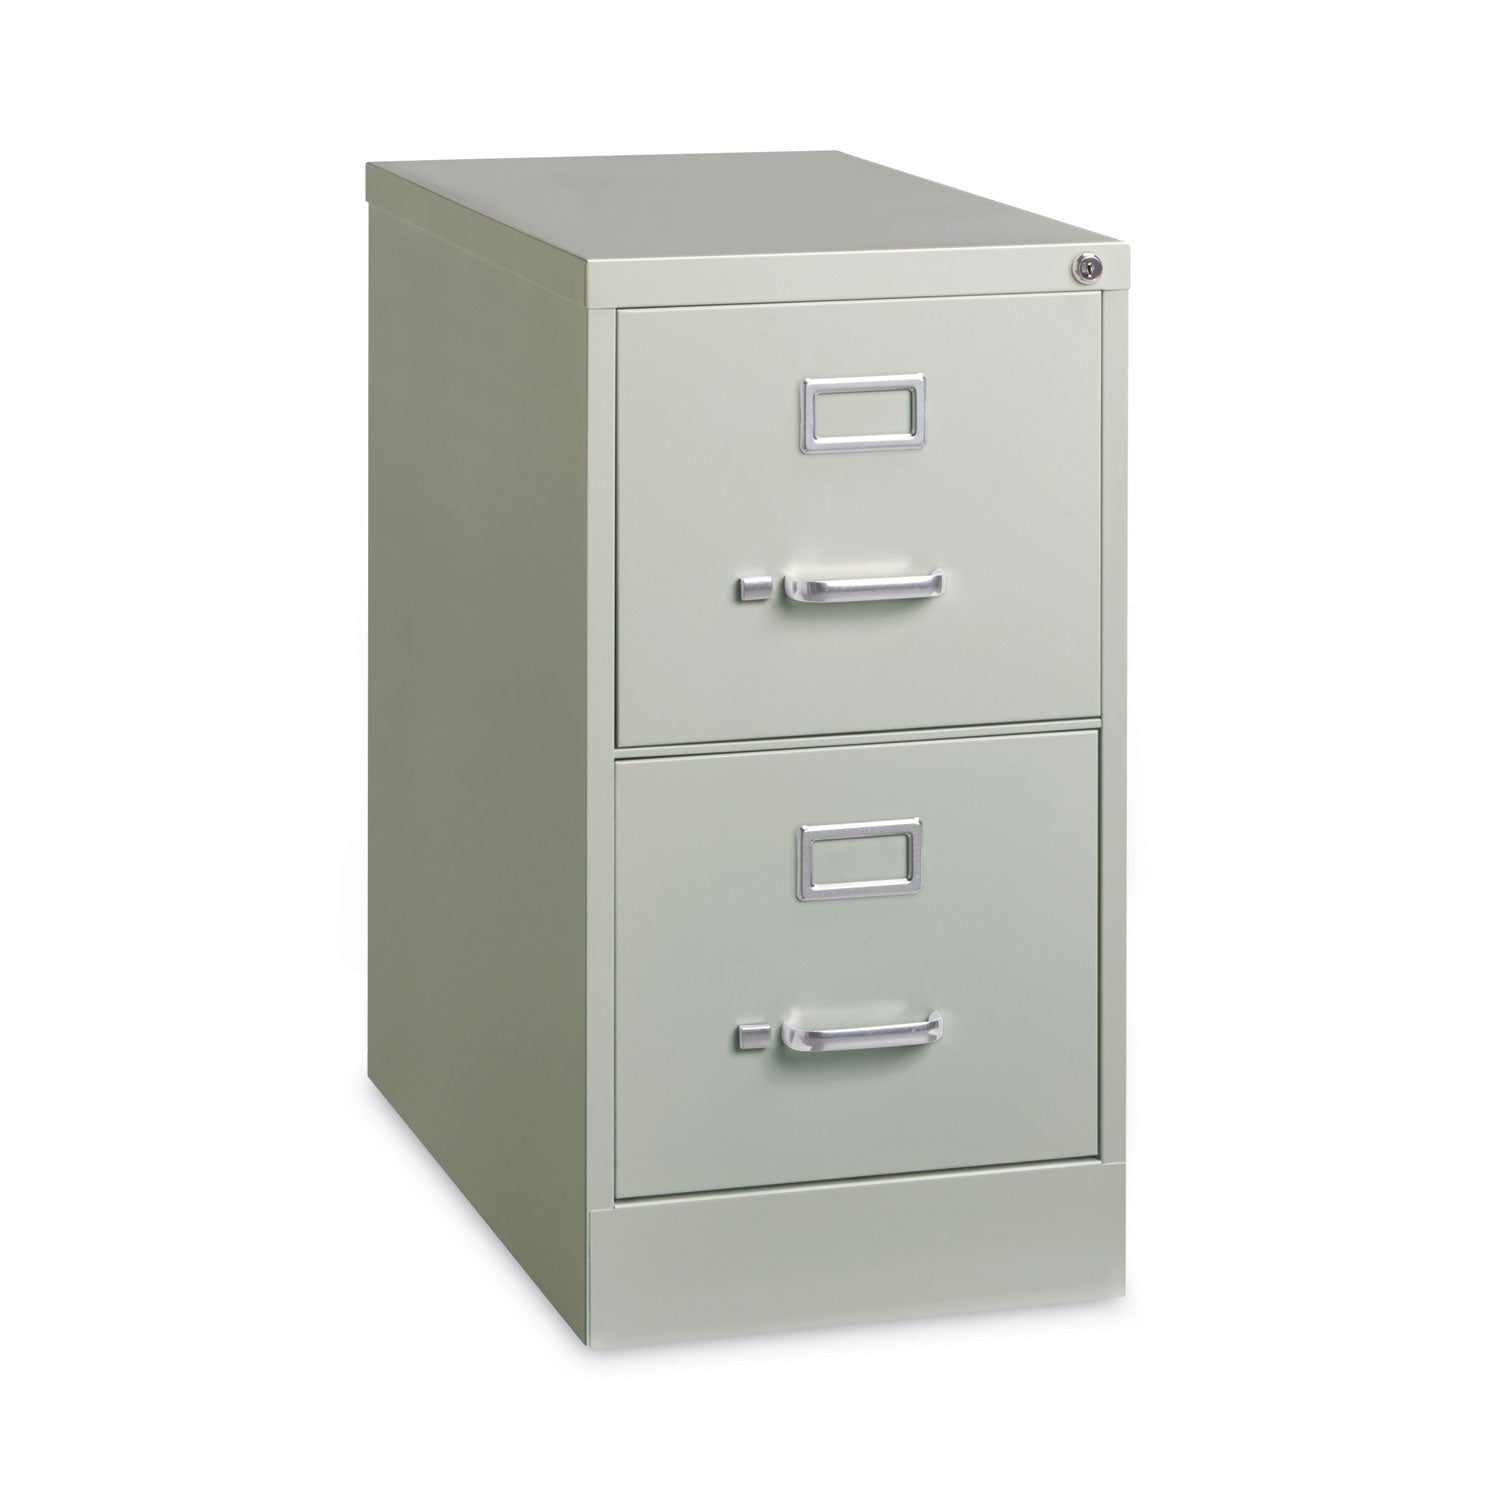 vertical-letter-file-cabinet-2-letter-size-file-drawers-light-gray-15-x-265-x-2837_hid14027 - 2